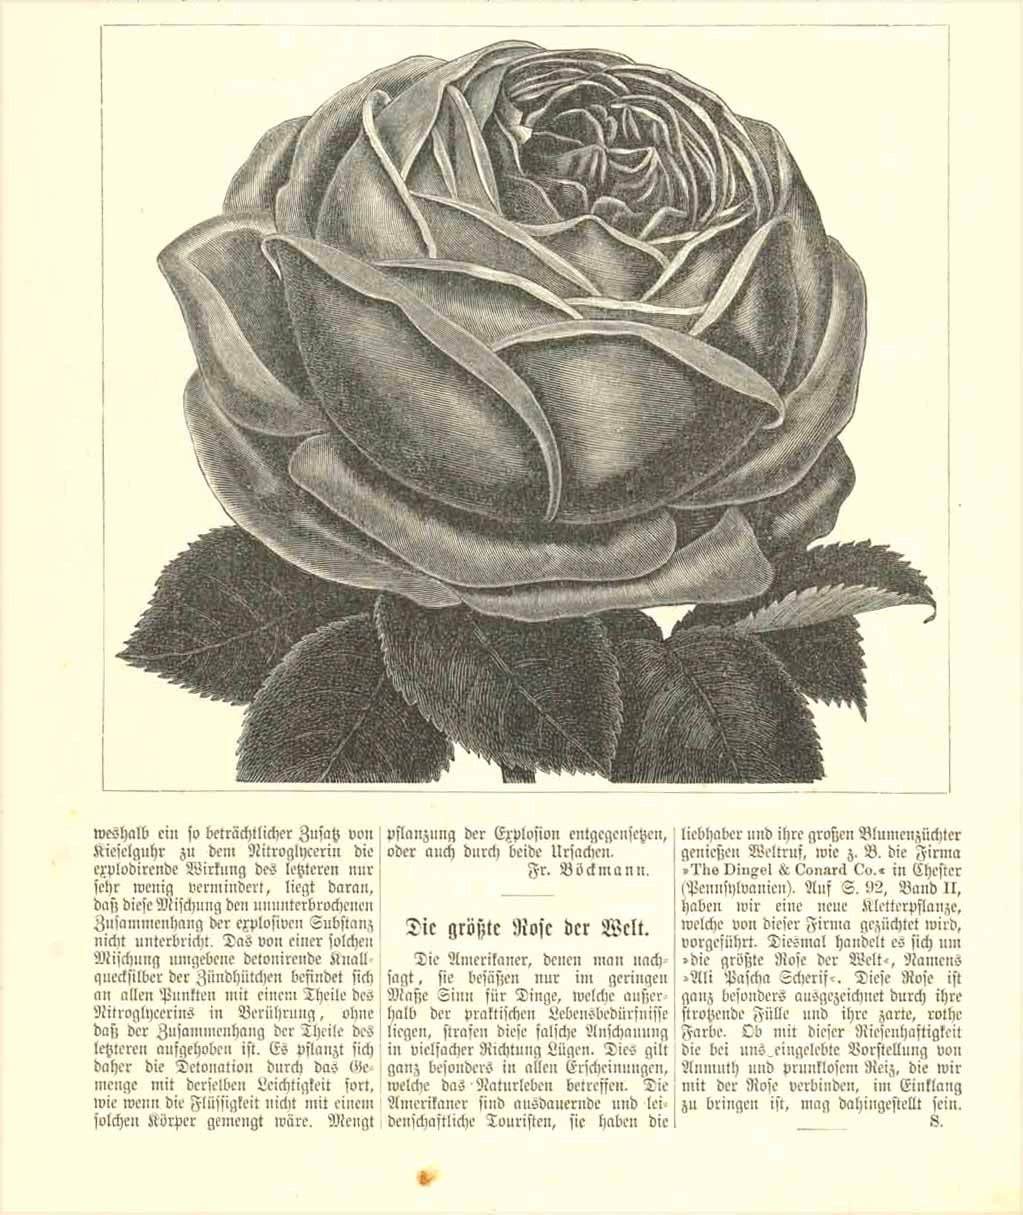 "Die groesste Rose der Welt" (the biggest rose in the world)  Wood engraving ca 1880. Below the image is German text about Americans and the rose "Ali Pascha Sherif".  Original antique print 